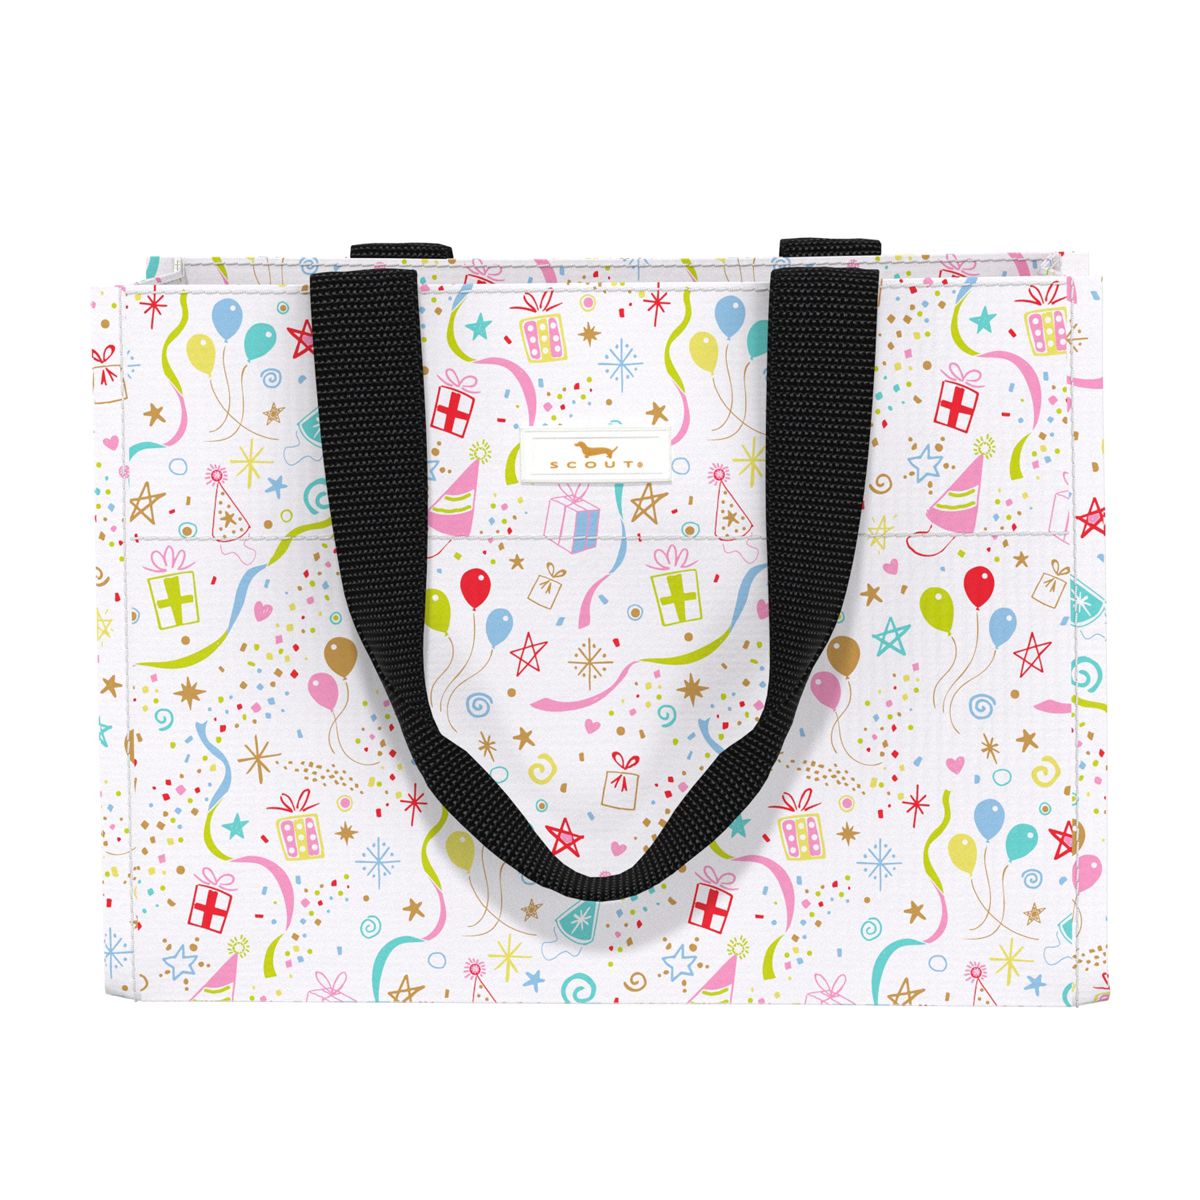 Scout Bags "Celebration" Tiny Package Gift Bag